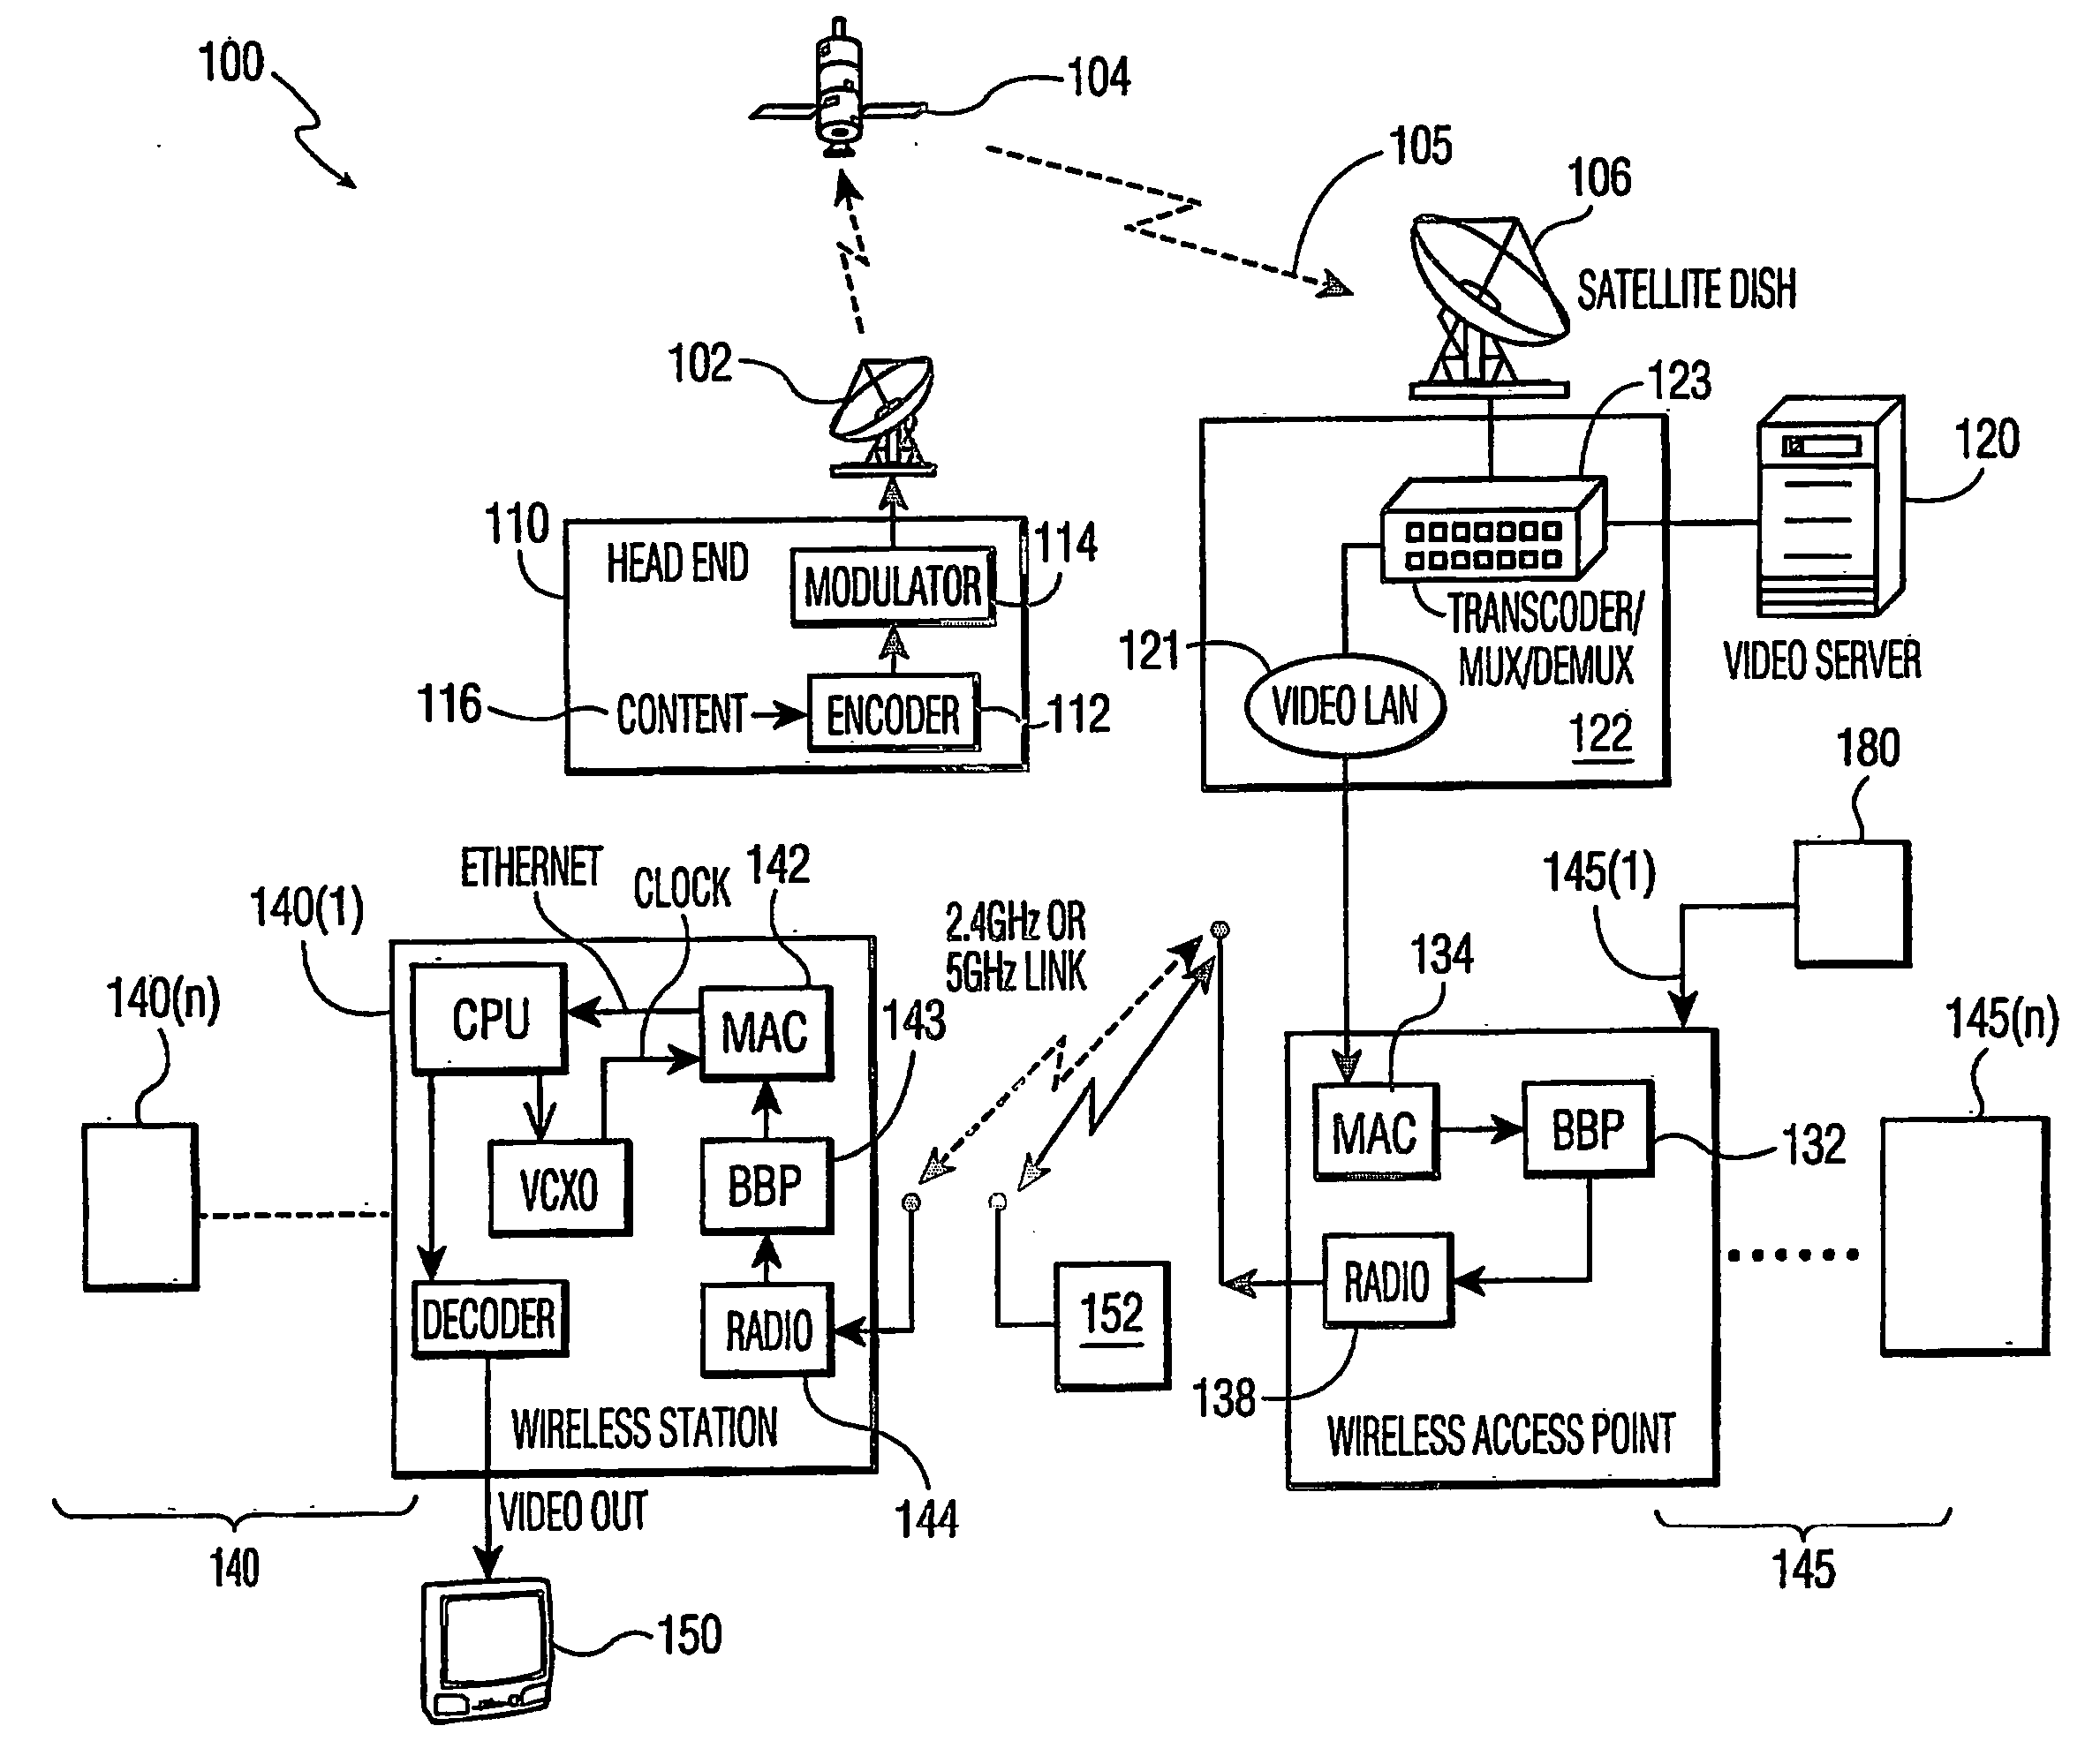 Method and apparatus for banding multiple access points